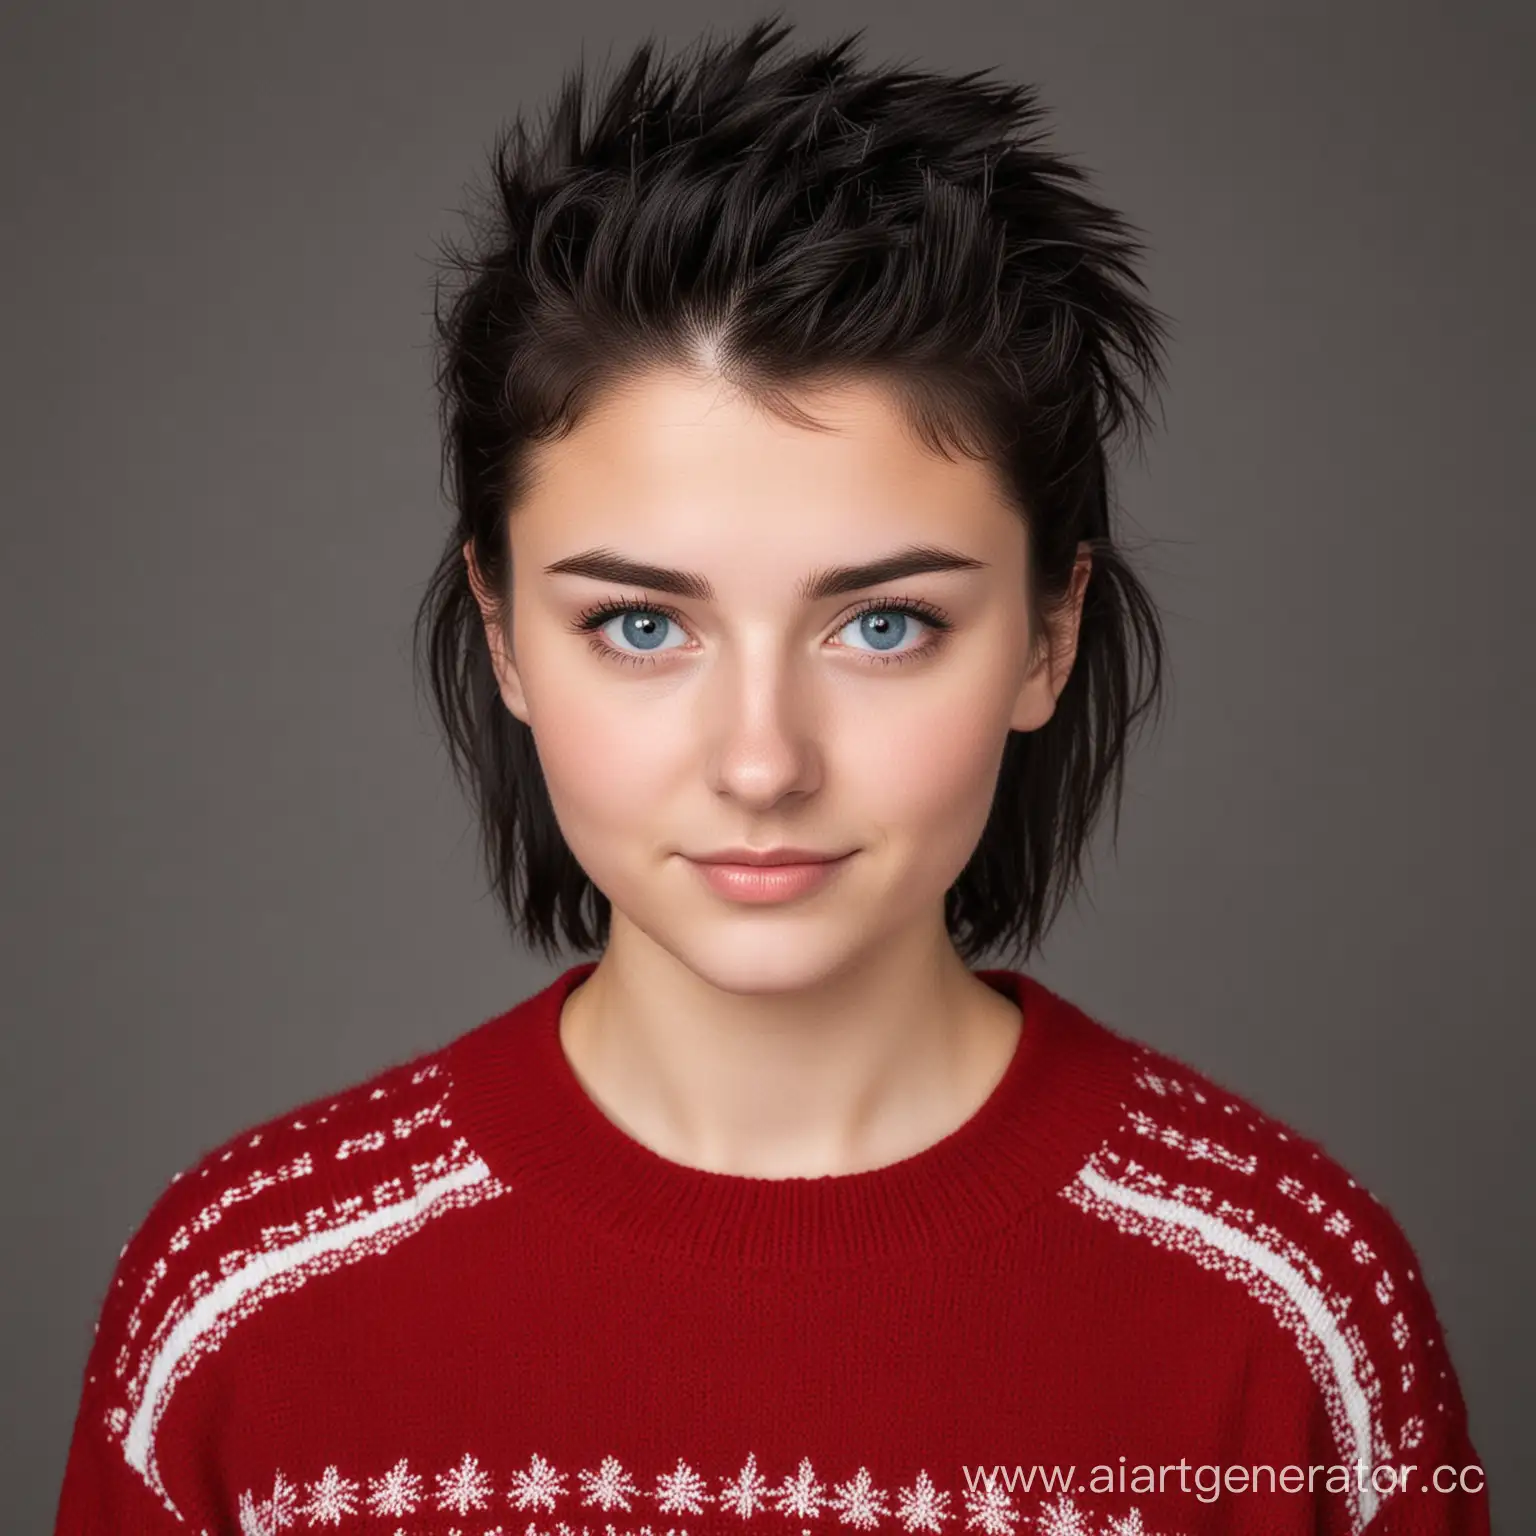 Teenage-Girl-with-Hedgehog-Haircut-in-Red-Sweater-Portrait